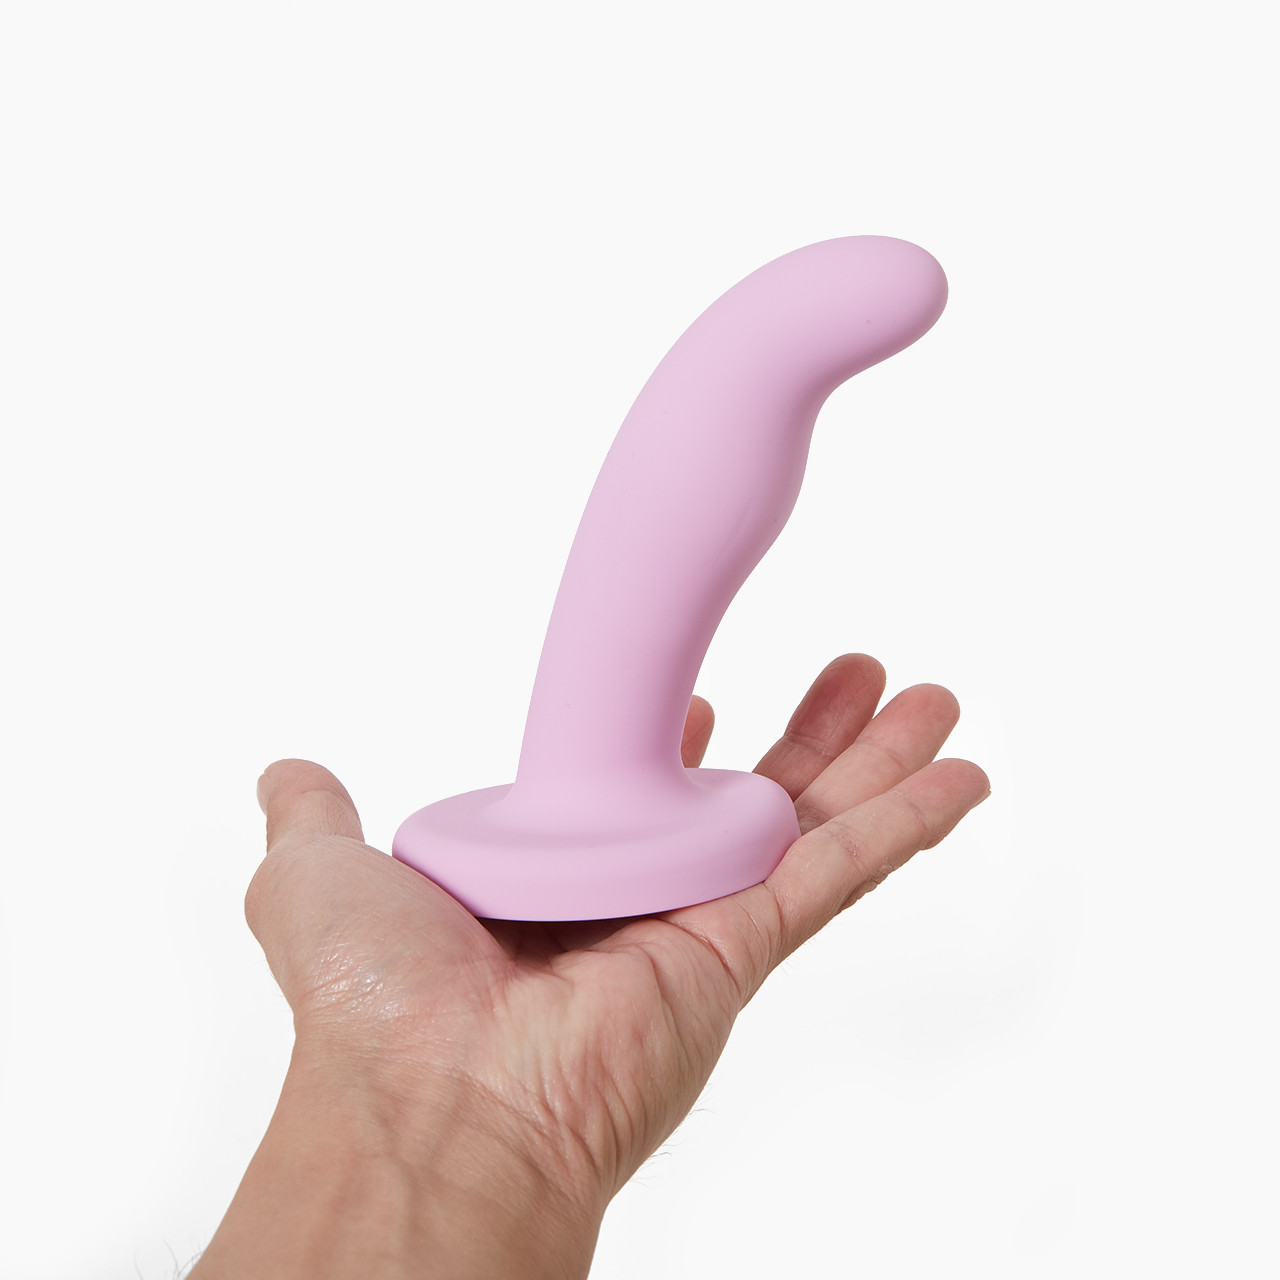 A hand displaying 'Sportsheets Lazre', a curved silicone toy with a base